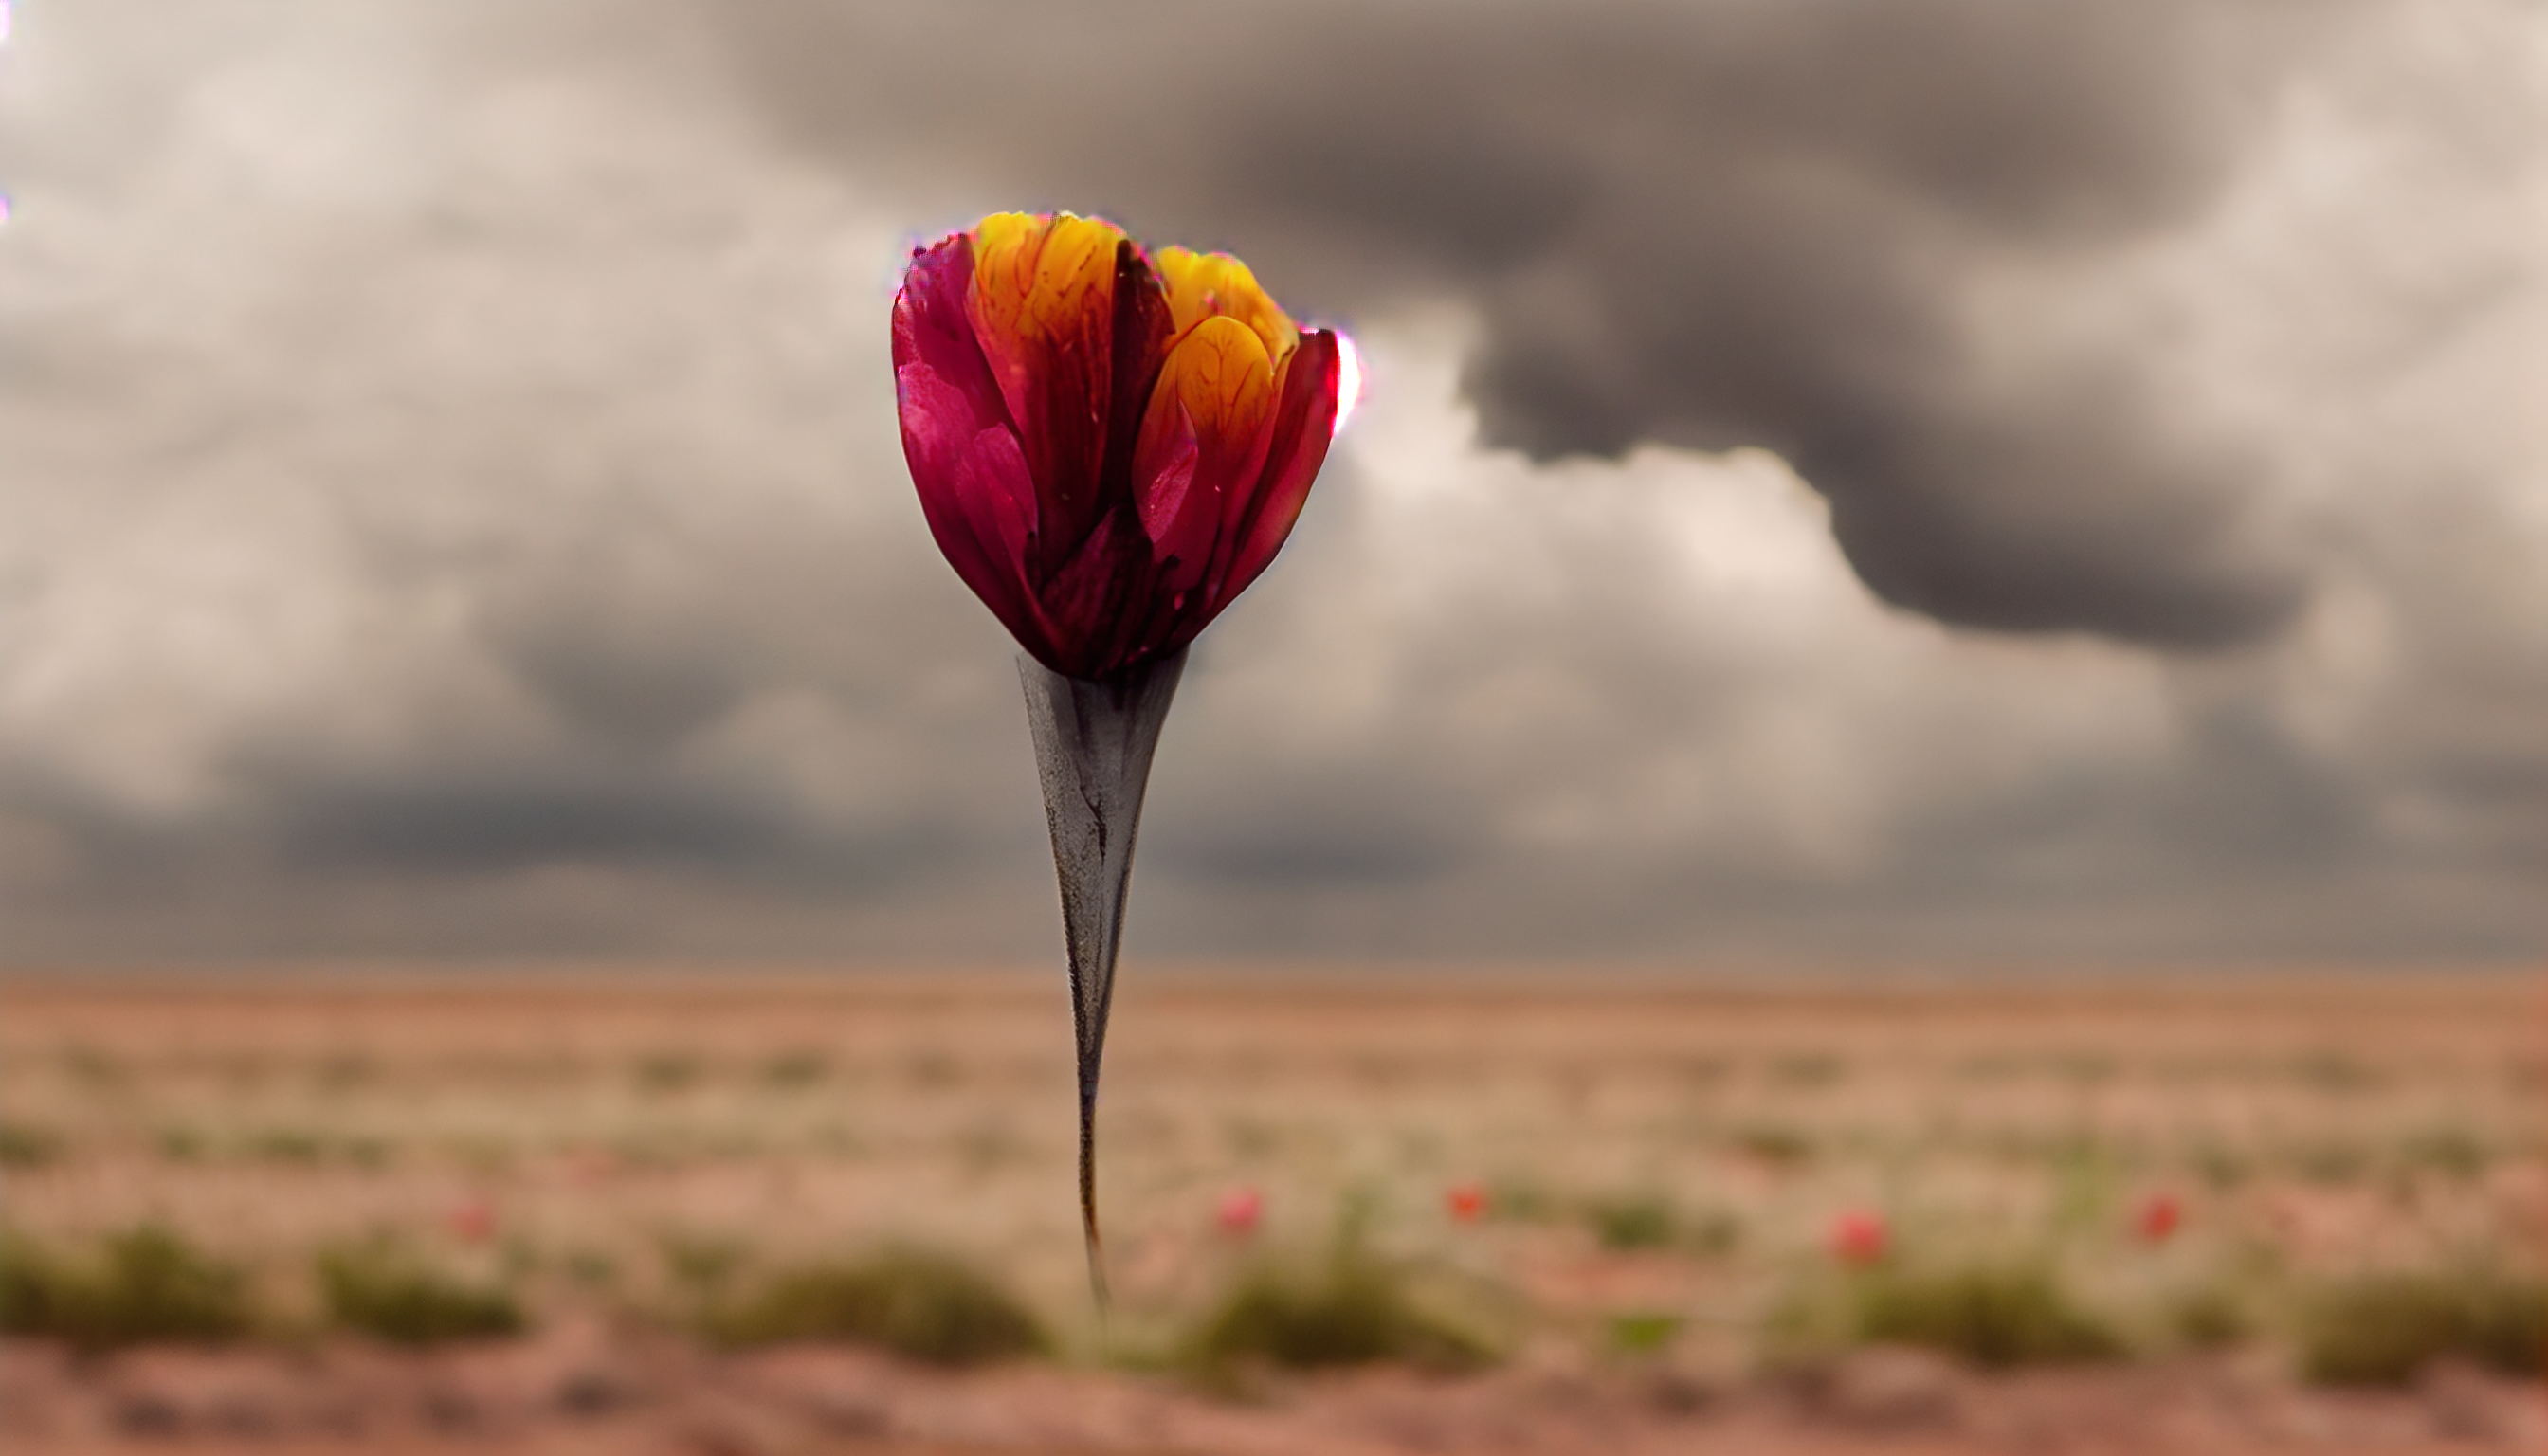 a single lonely tulip growing from dry dirt with clouds in the background